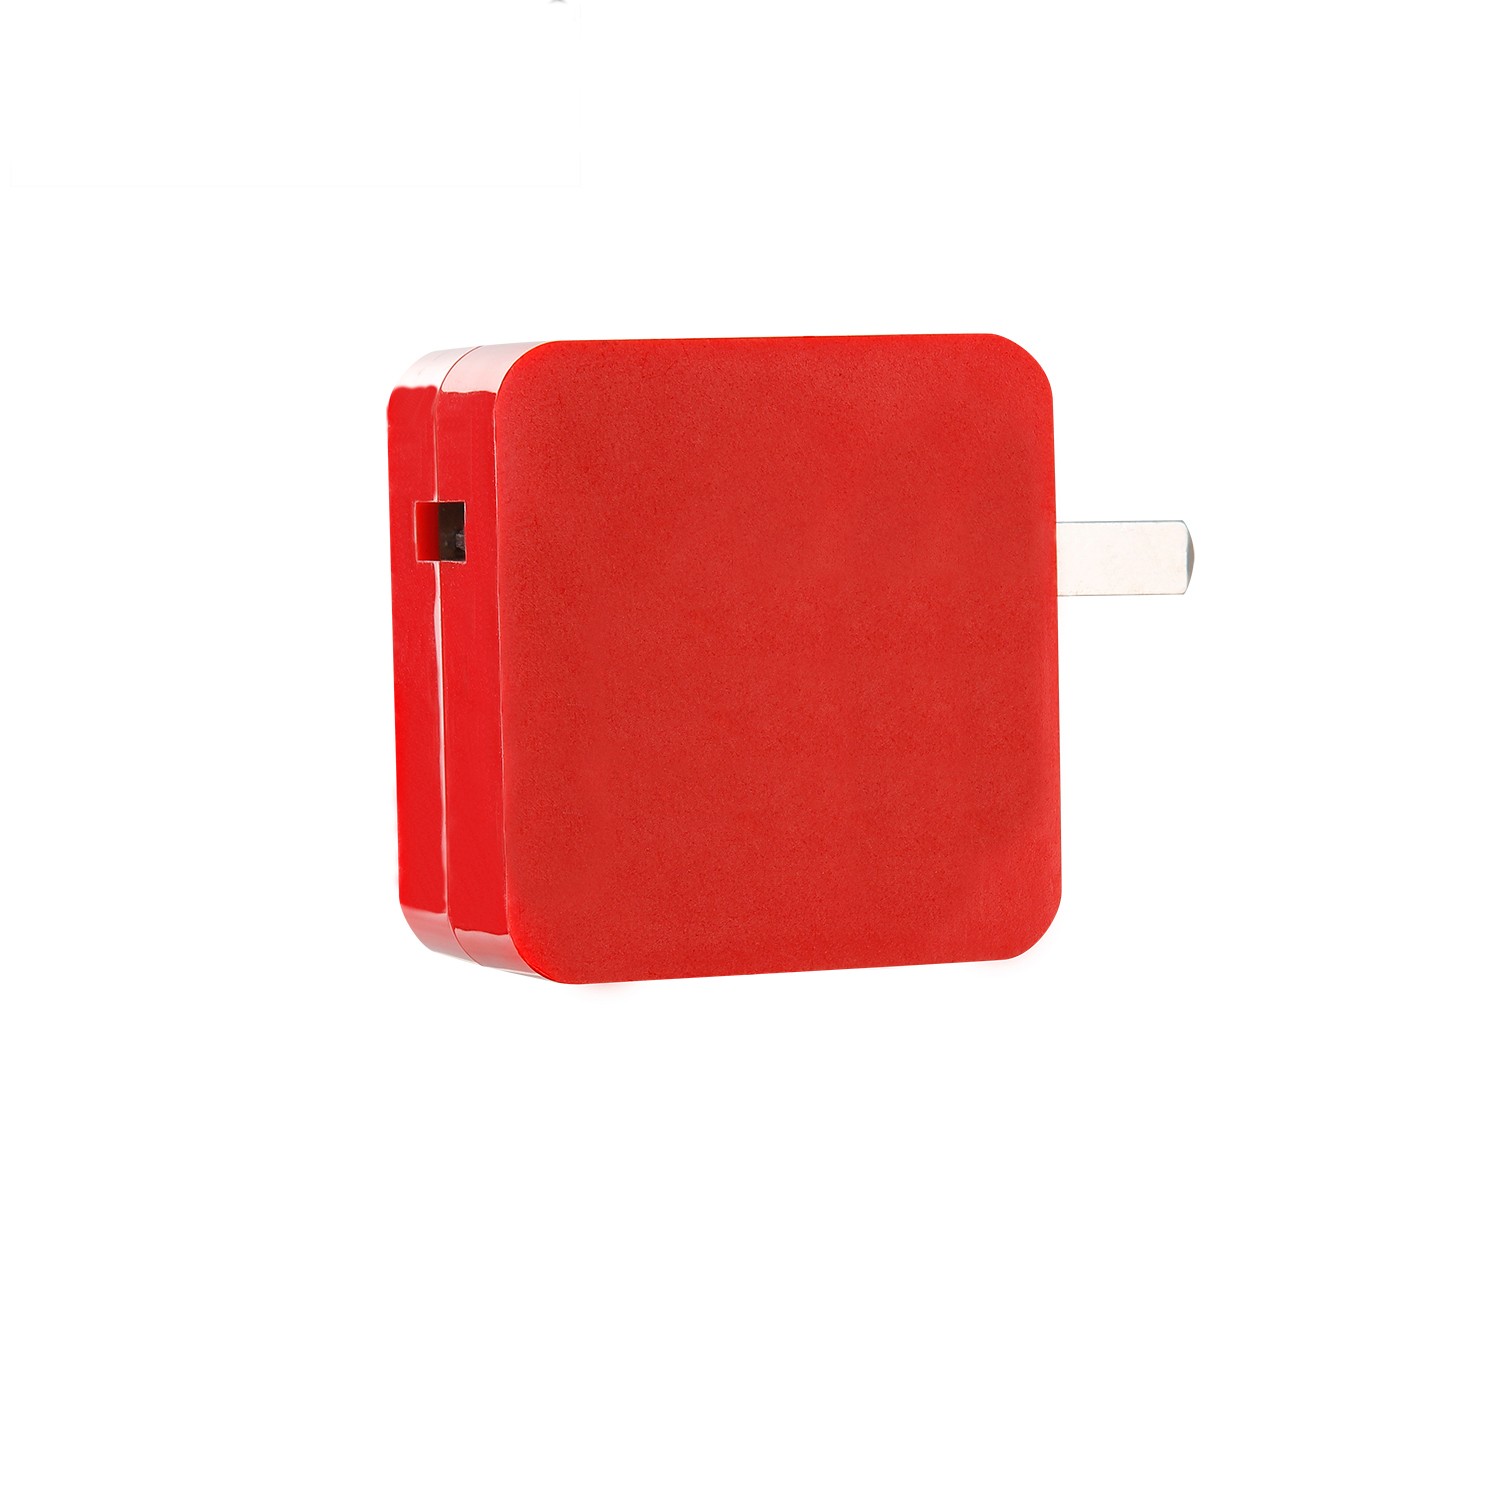 Do fast chargers charge ordinary mobile phones fast?adjustable power adapter(图1)